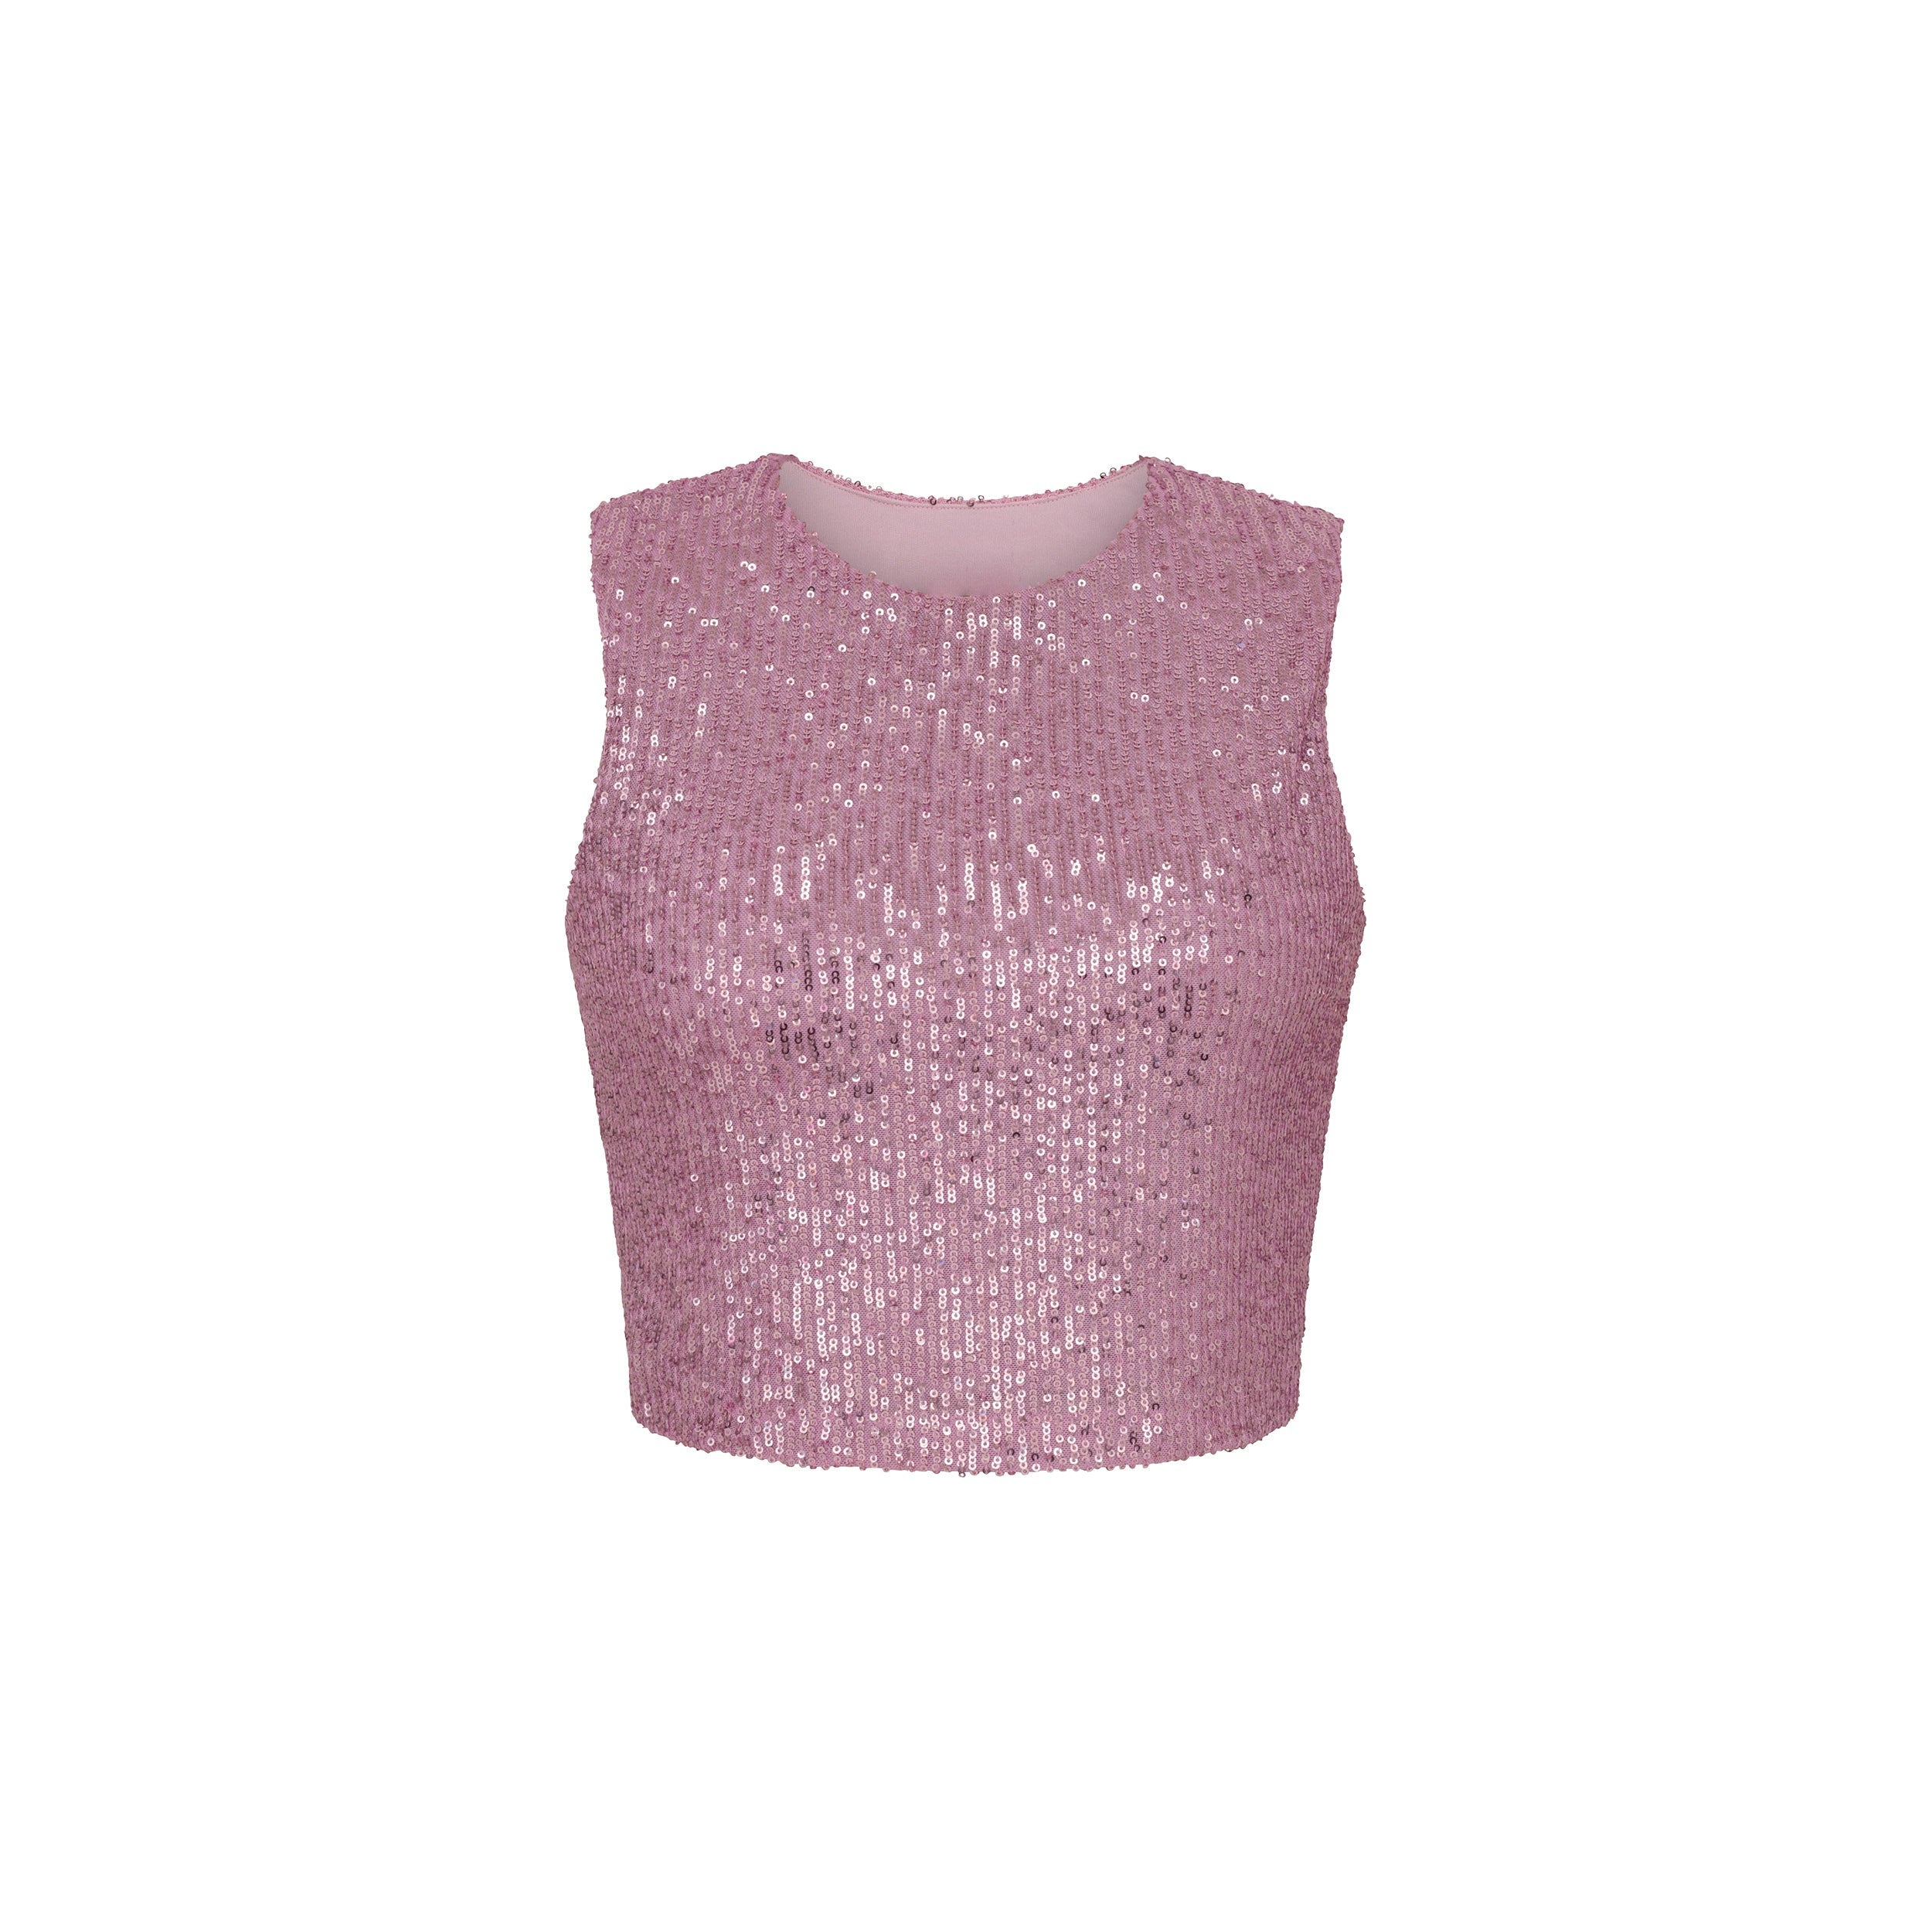 Product view of cropped pink top with lustrous sequin embroidery